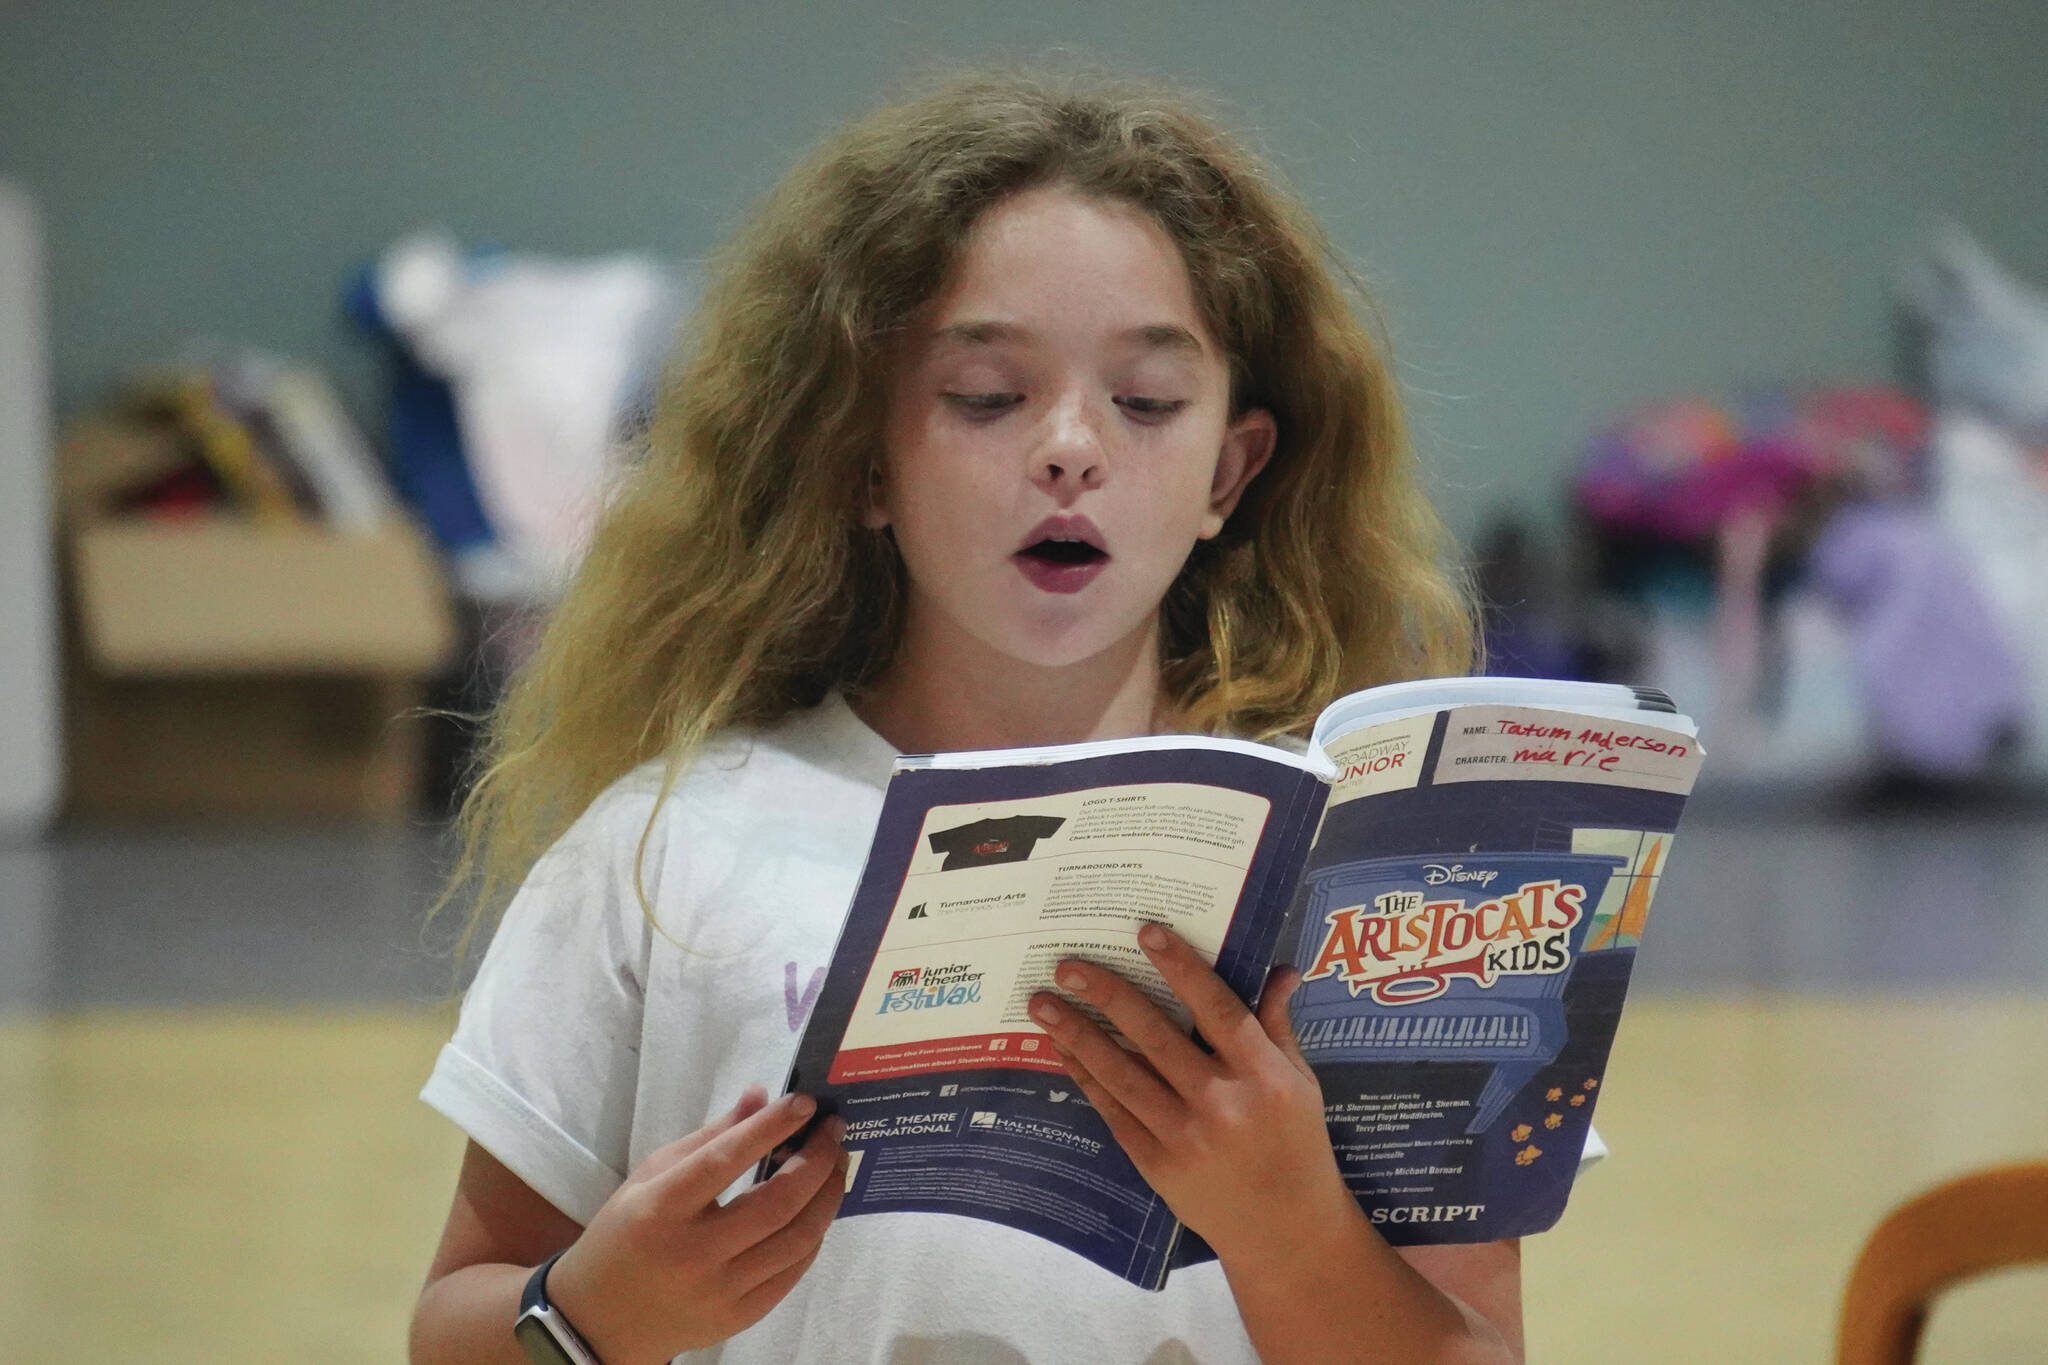 Photos by Jake Dye/Peninsula Clarion
Tatum Anderson rehearses “The Aristocats Kids” during a Triumvirate Theatre drama camp on Wednesday, July 19, 2023 at the Boys and Girls Club of the Kenai Peninsula Main Office in Kenai, Alaska.